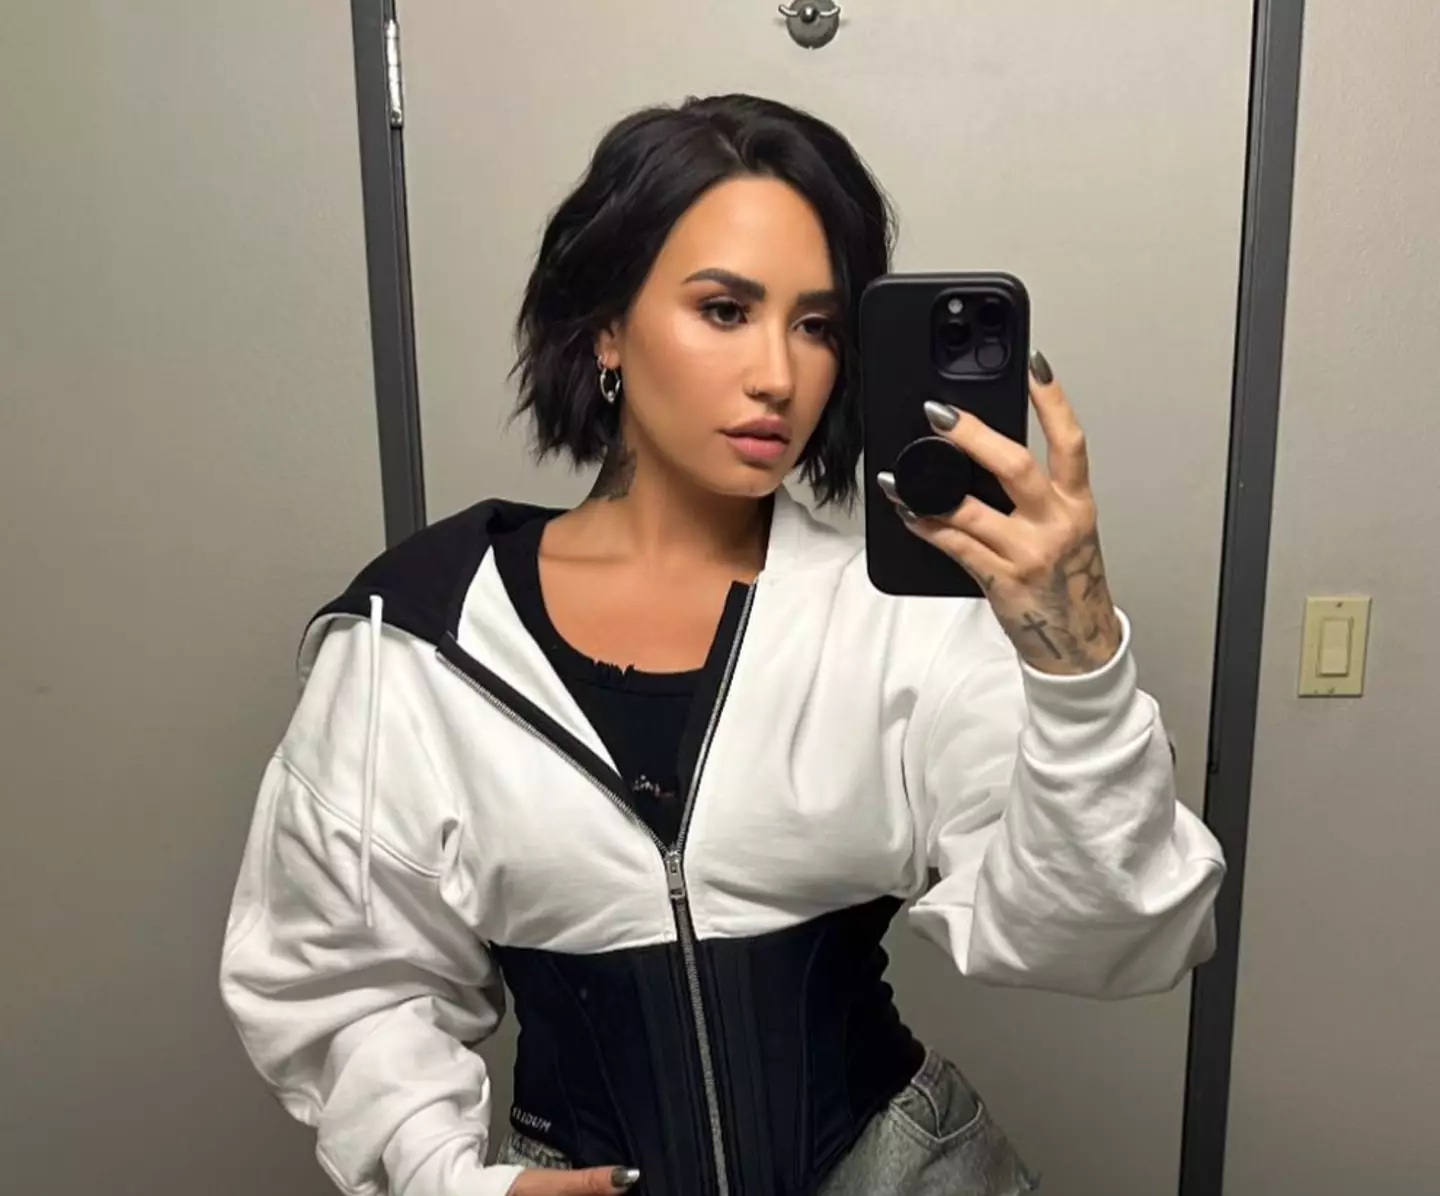 Lovato had been in São Paulo for The Town 2023 music festival.